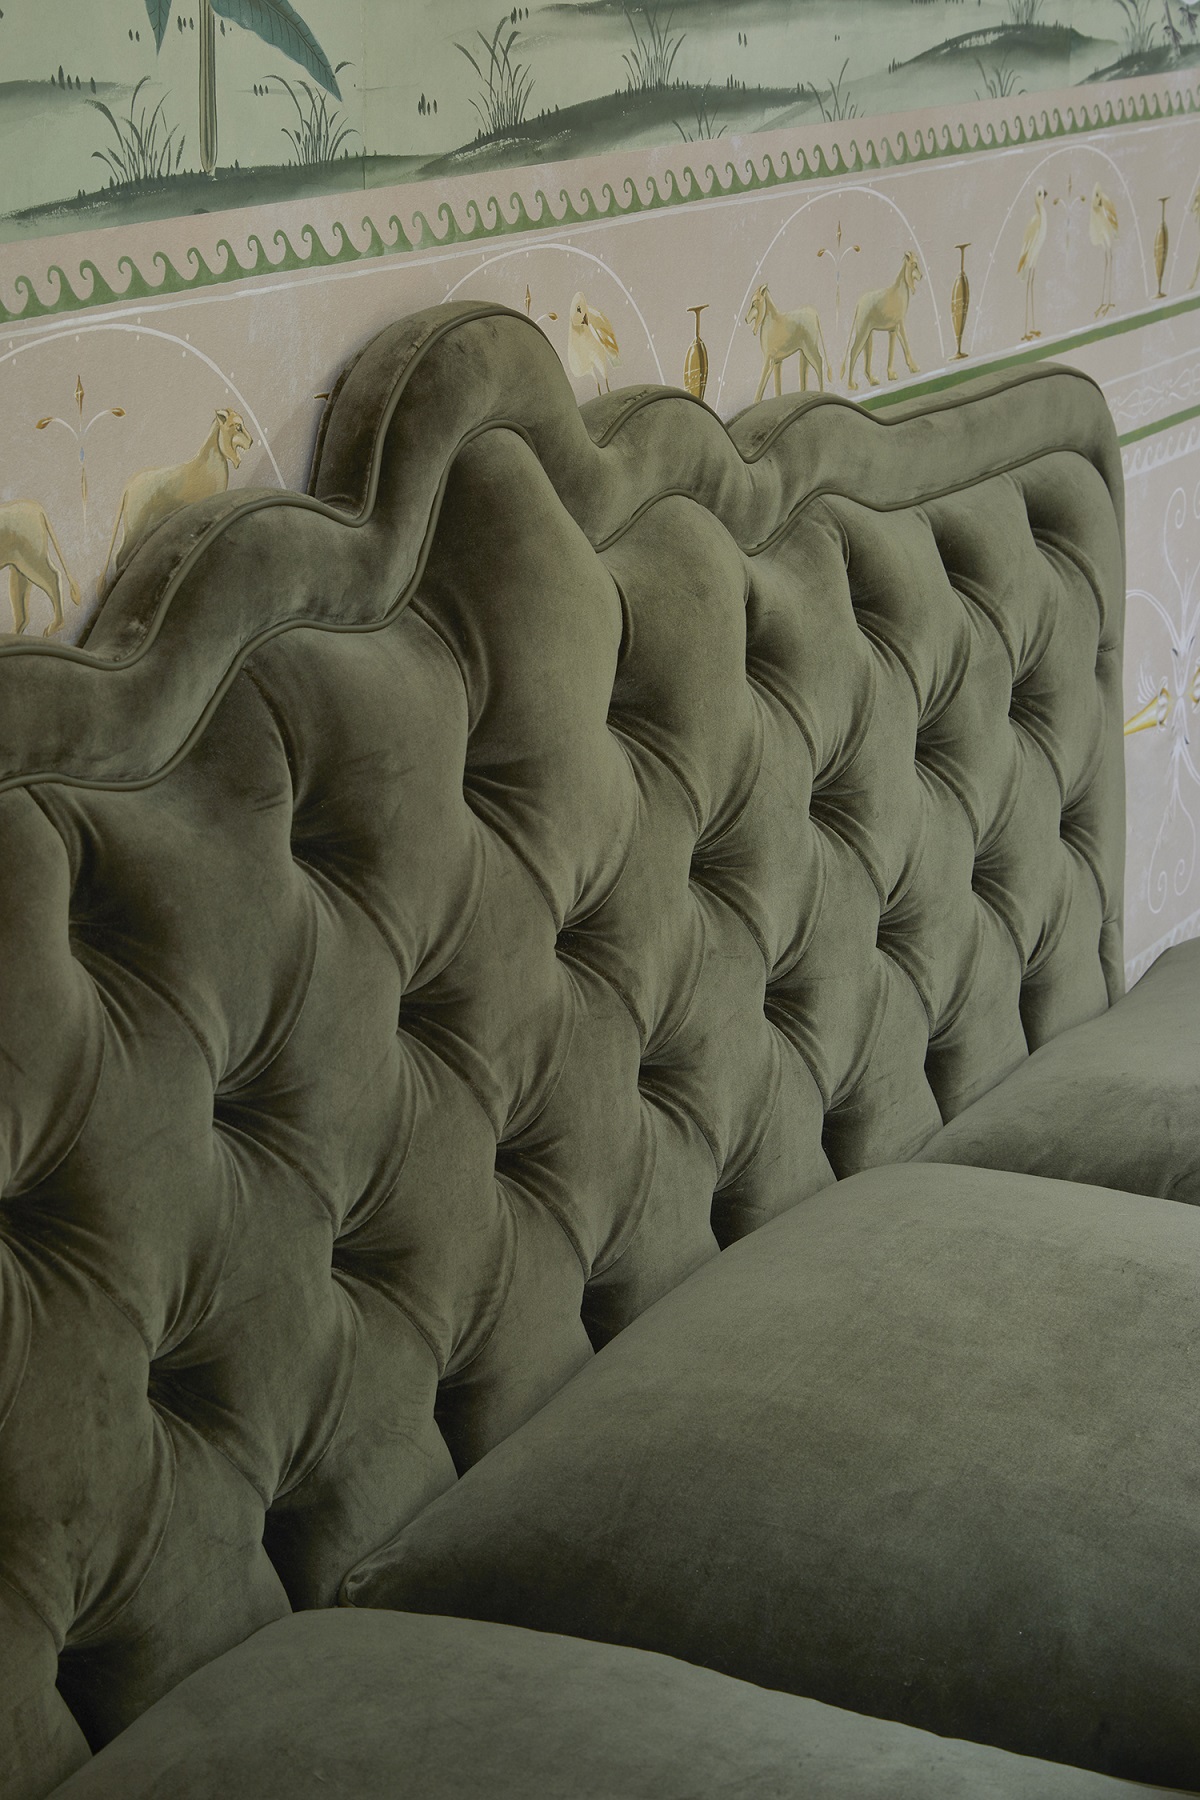 olive green padded and buttoned headboard against vintage patterned wallpaper